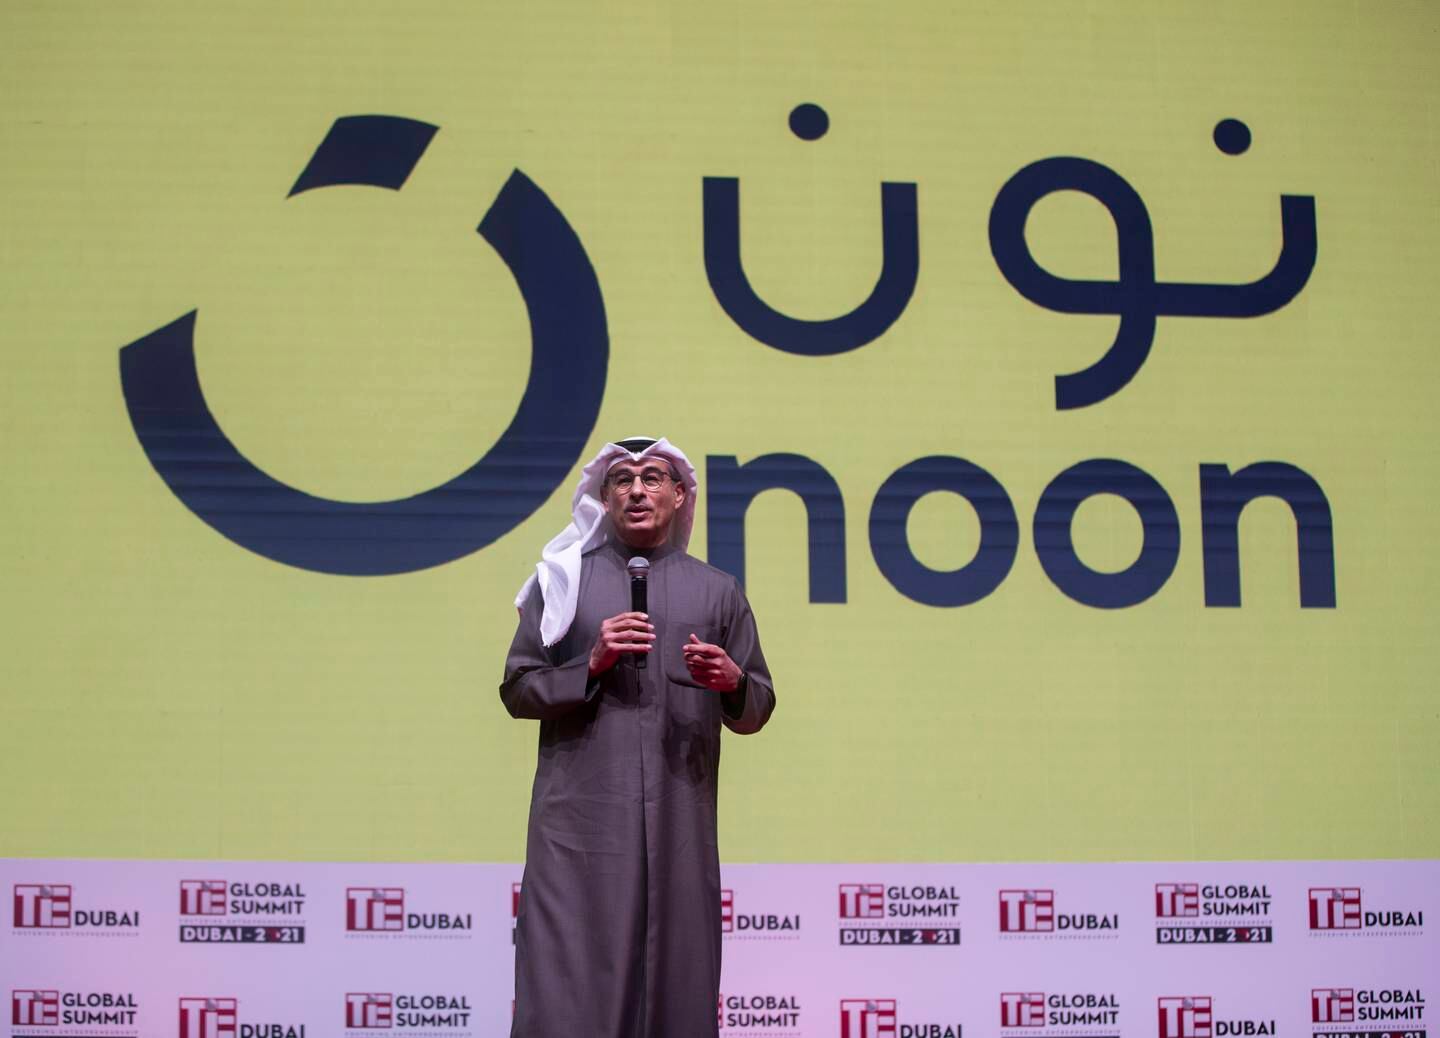 Mohamed Alabbar, founder of Noon, speaking at the Tie Global Summit at Expo 2020 Dubai. Leslie Pableo